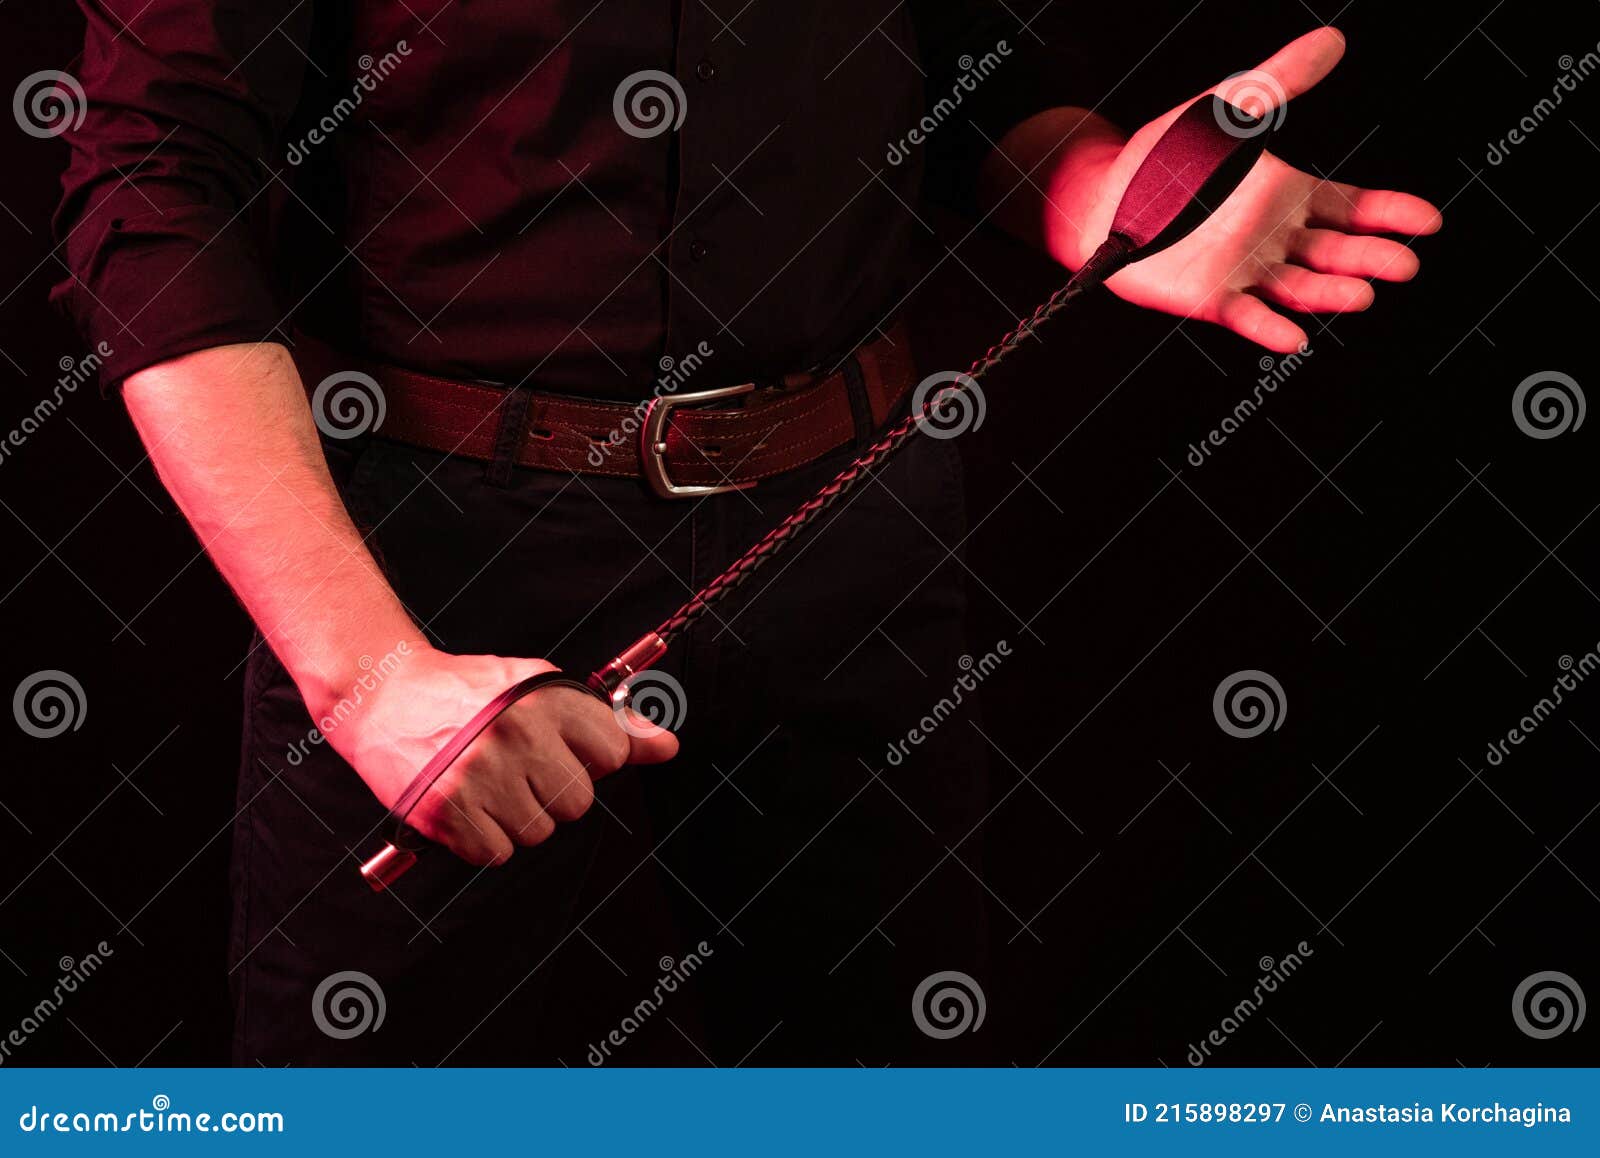 Male Hand Holding Black Leather Whip. Flogger Stock Image - Image of ...